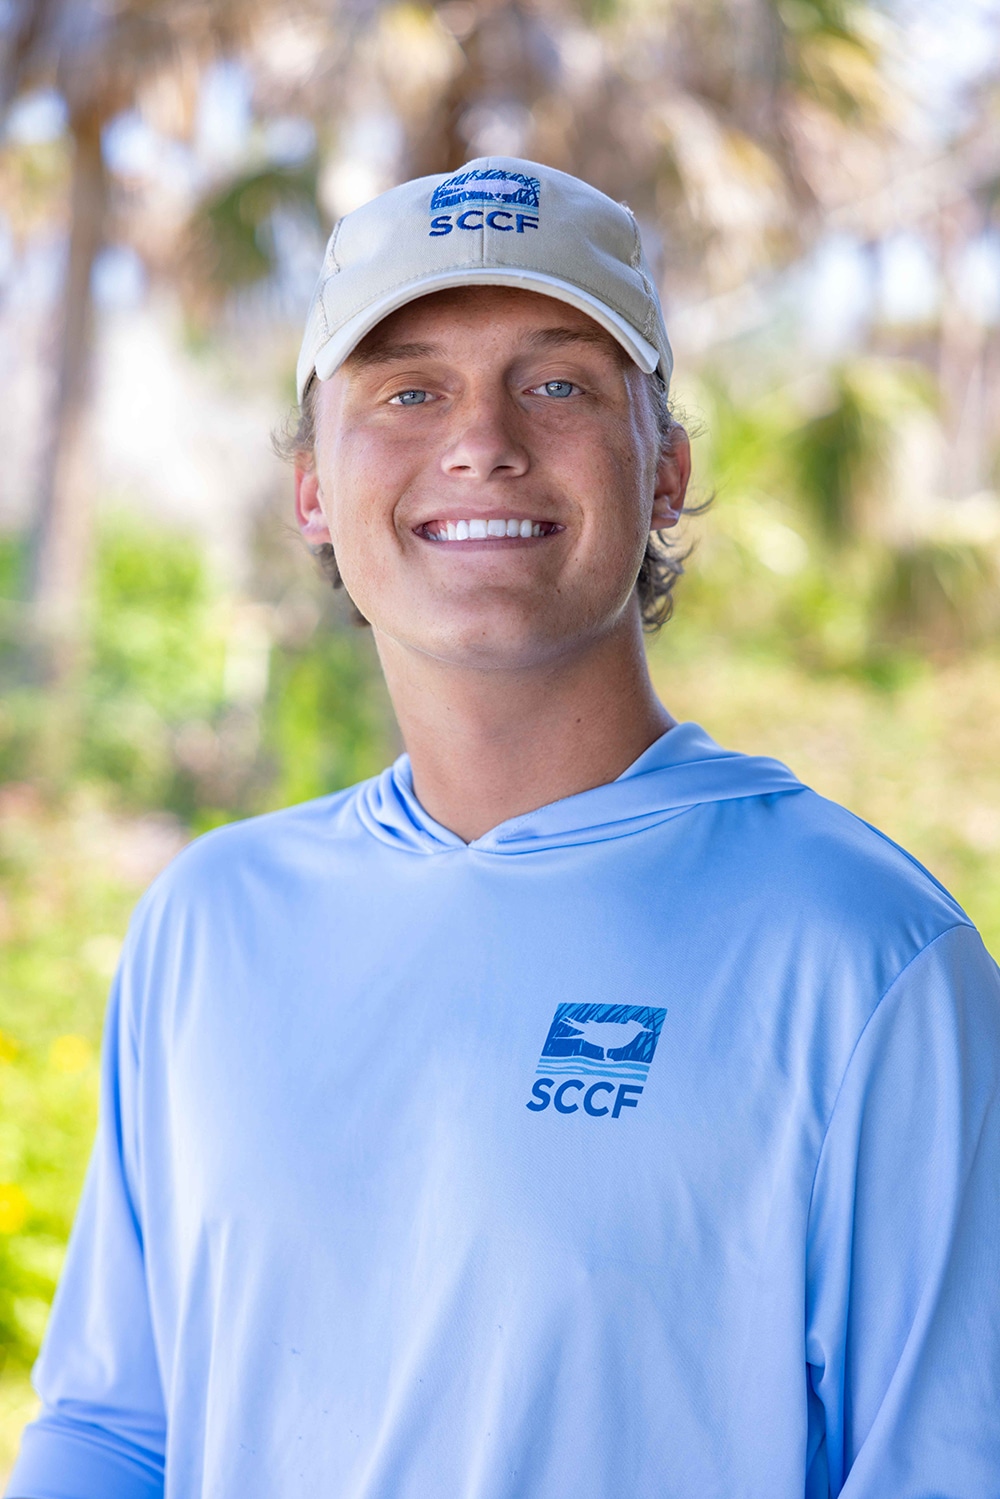 man smiling in sccf hat and shirt